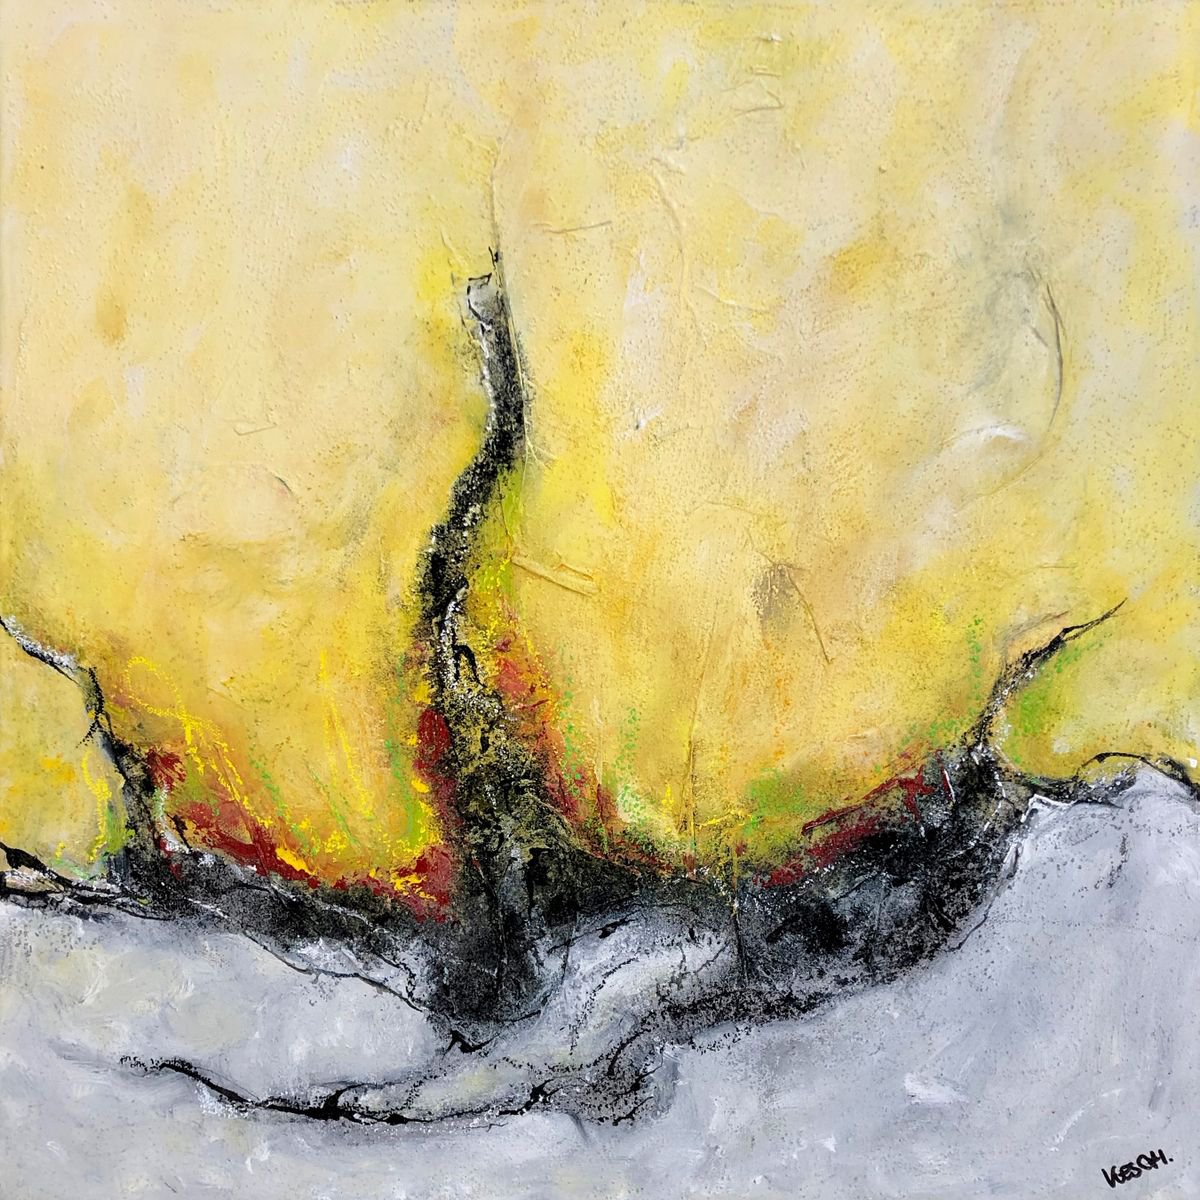 Fire & Ice I 50 x 50 cm I colorful abstract I square by Kirsten Schankweiler